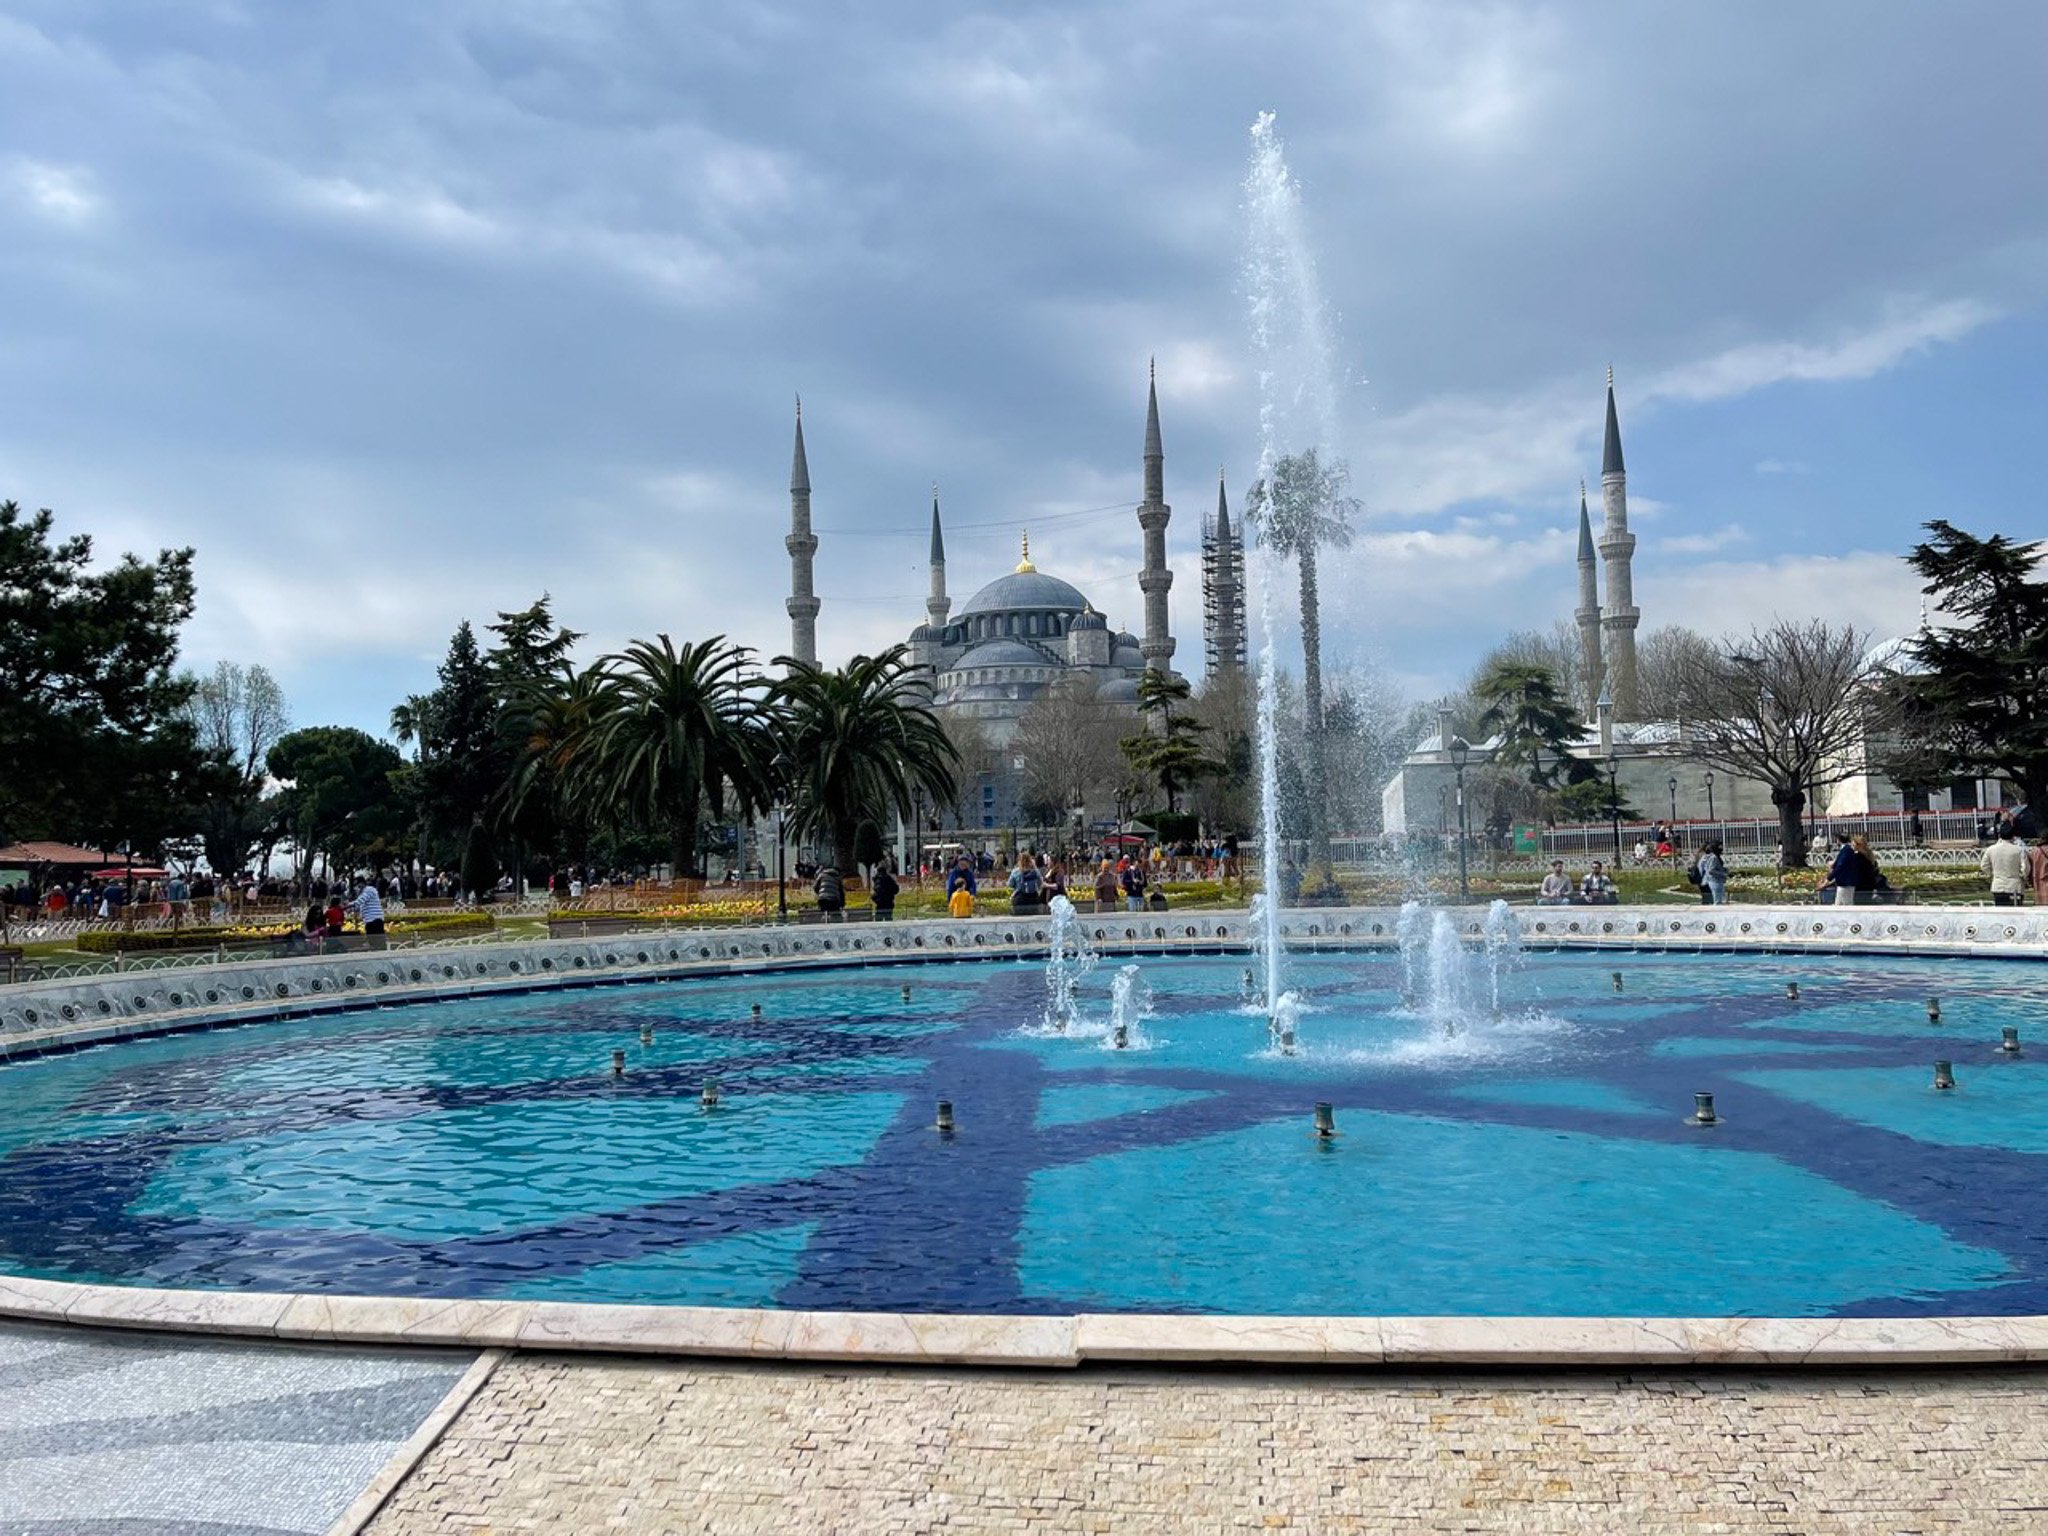 Mosque and fountain in Istanbul, Turkey.